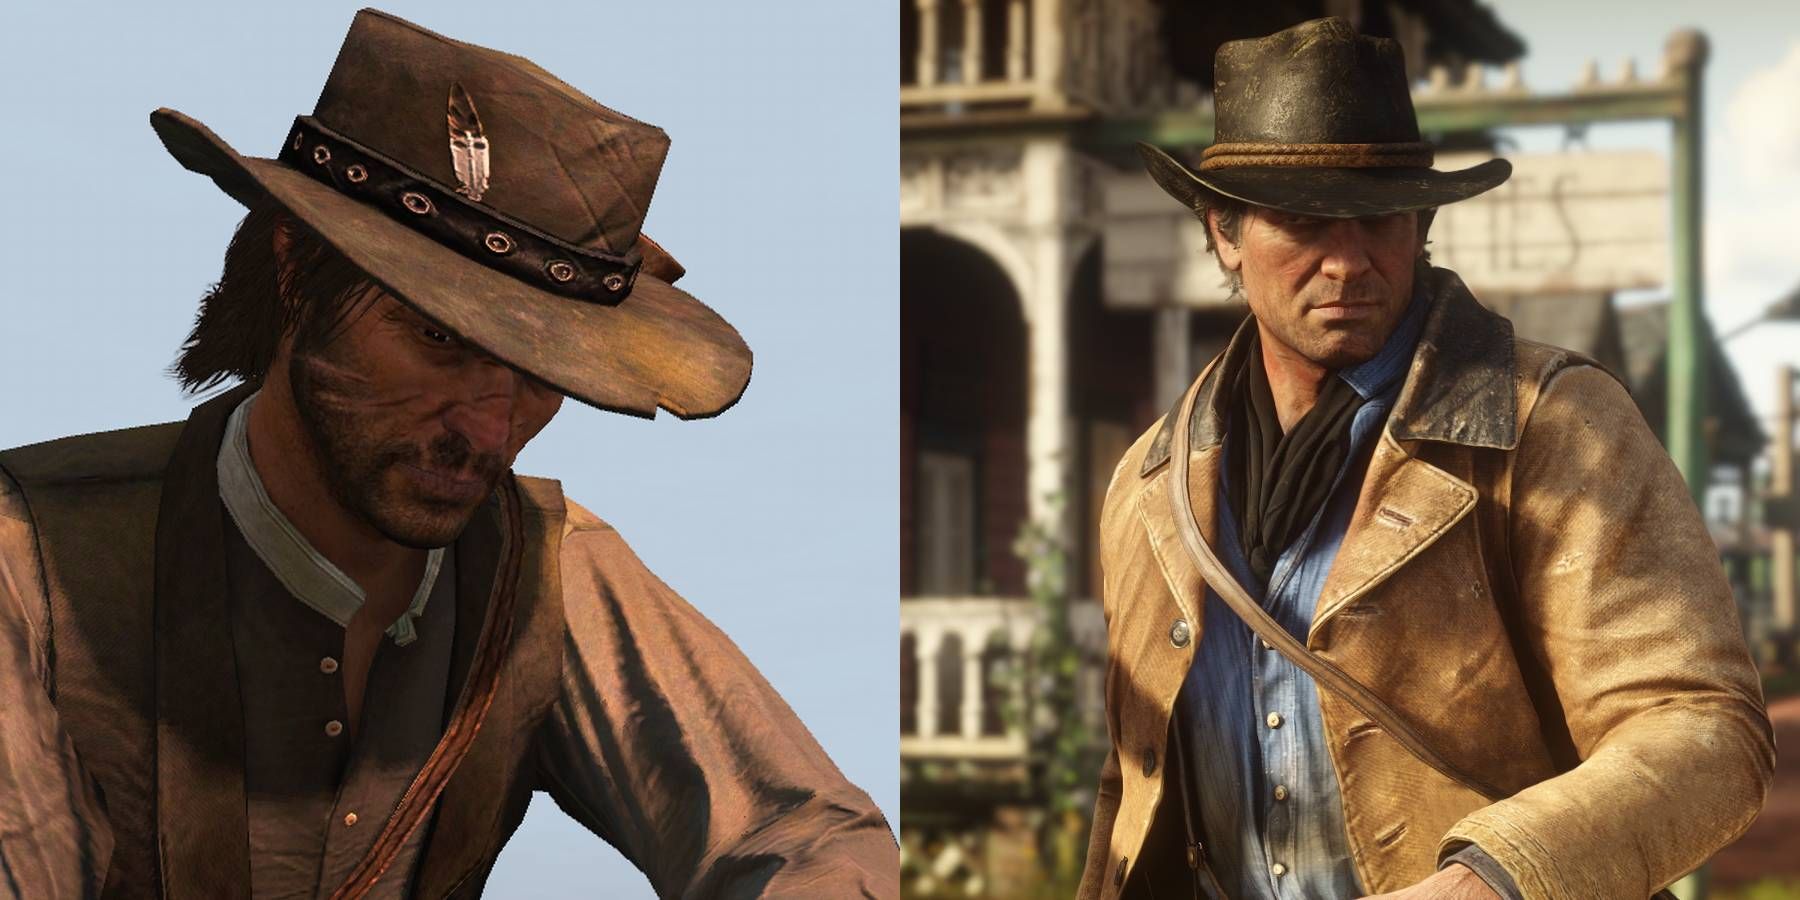 John Marston and Arthur Morgan from the Red Dead Redemption games